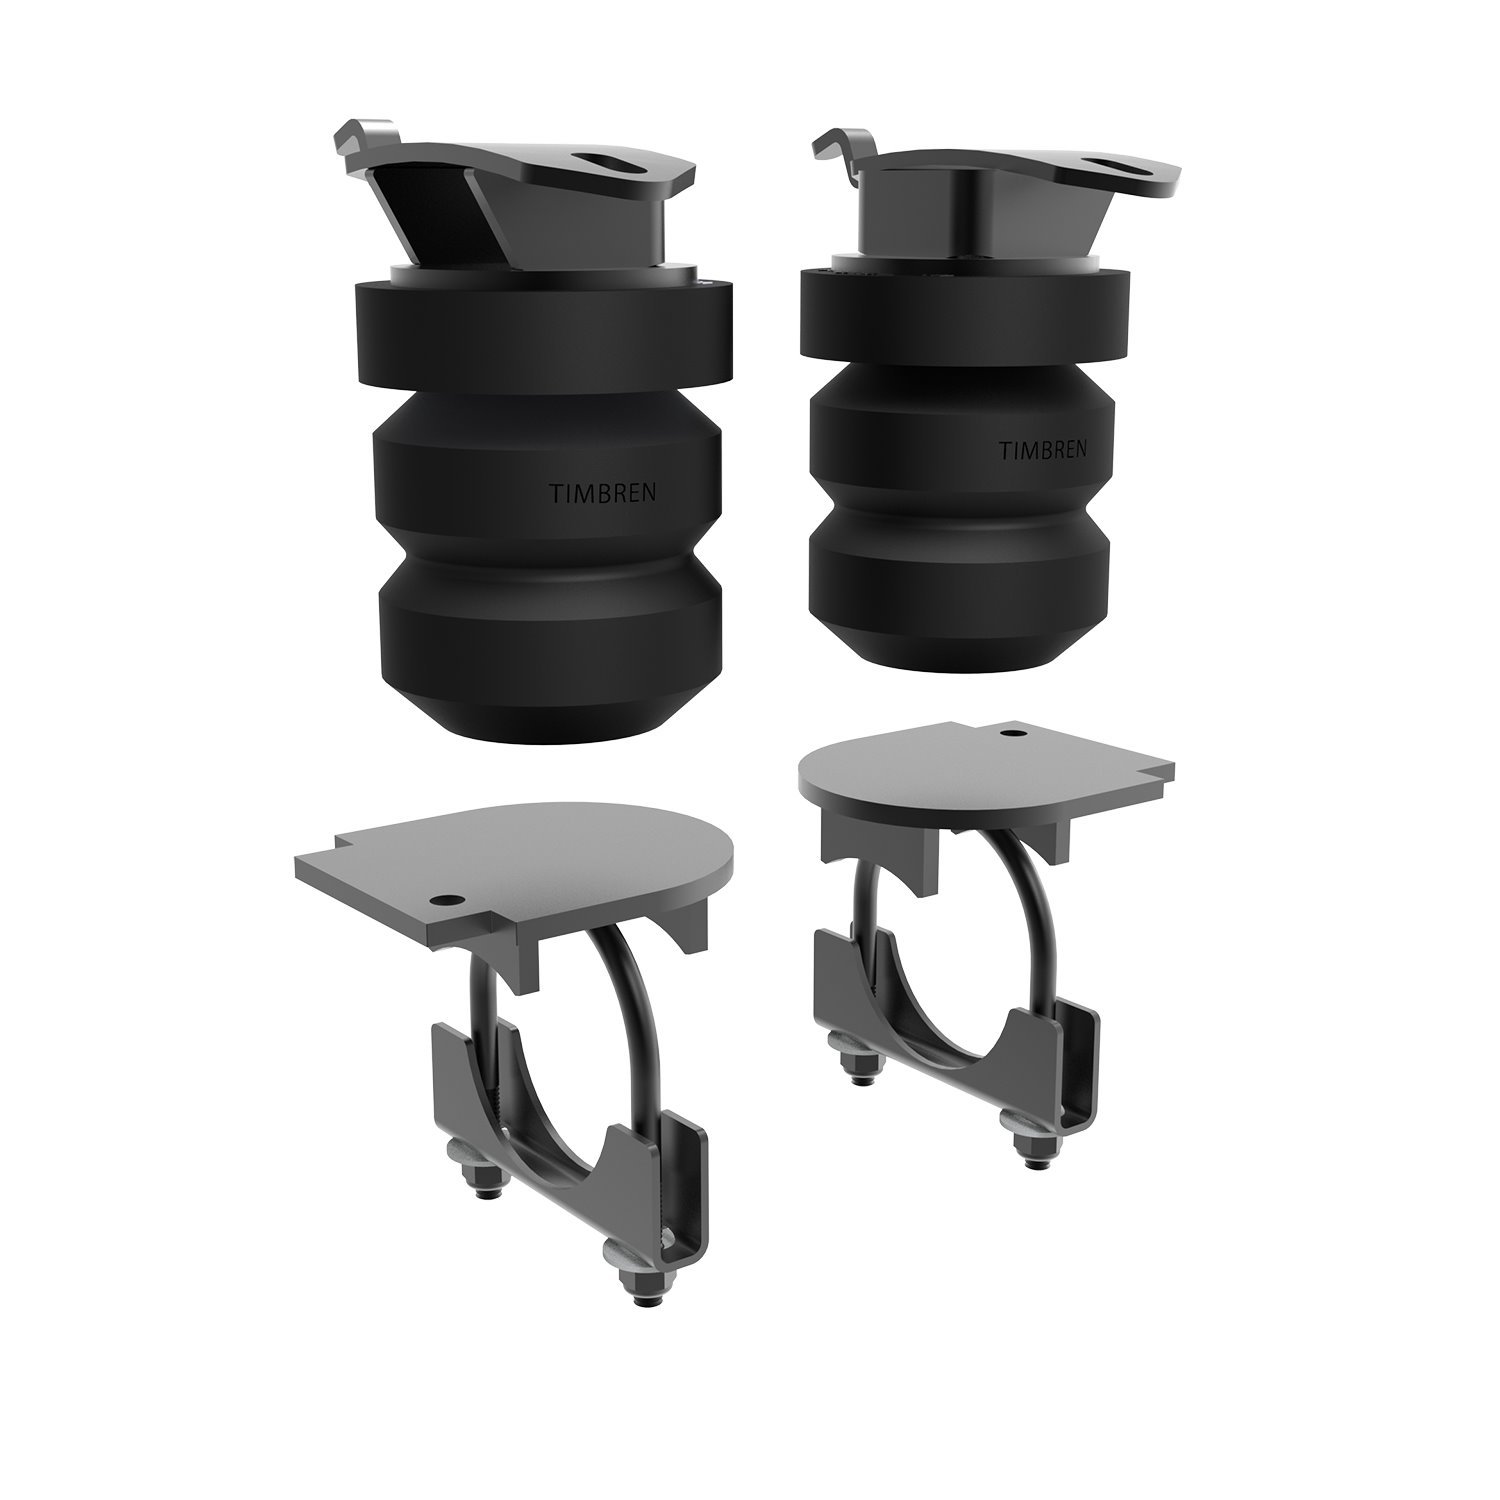 DDR052 SES Suspension Enhancement System Rear Kit for 2005-2011 Dodge Dakota [Rated Capacity: 3000 lbs.]